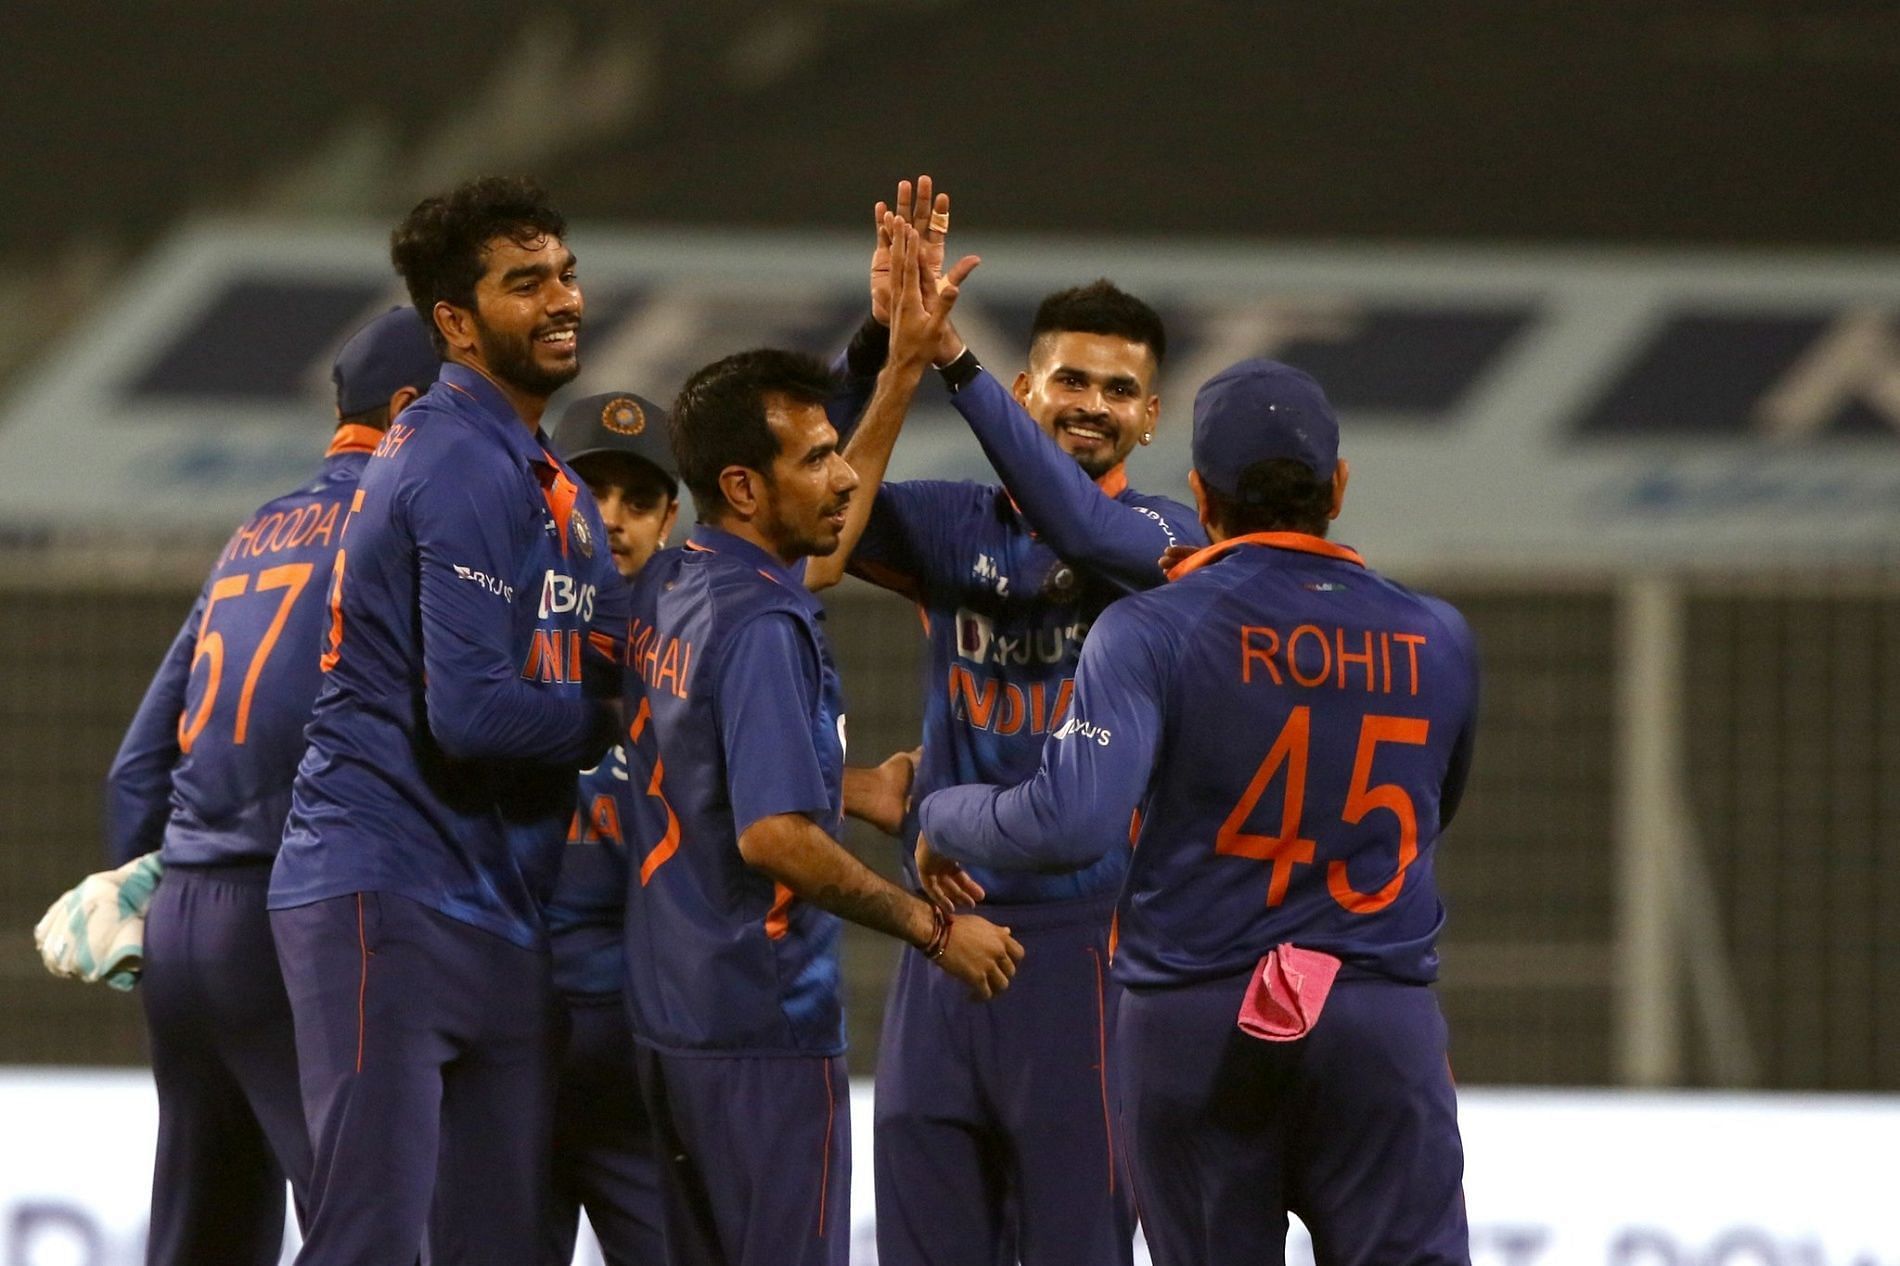 Team India celebrate a wicket during the 3rd T20I. Pic: BCCI